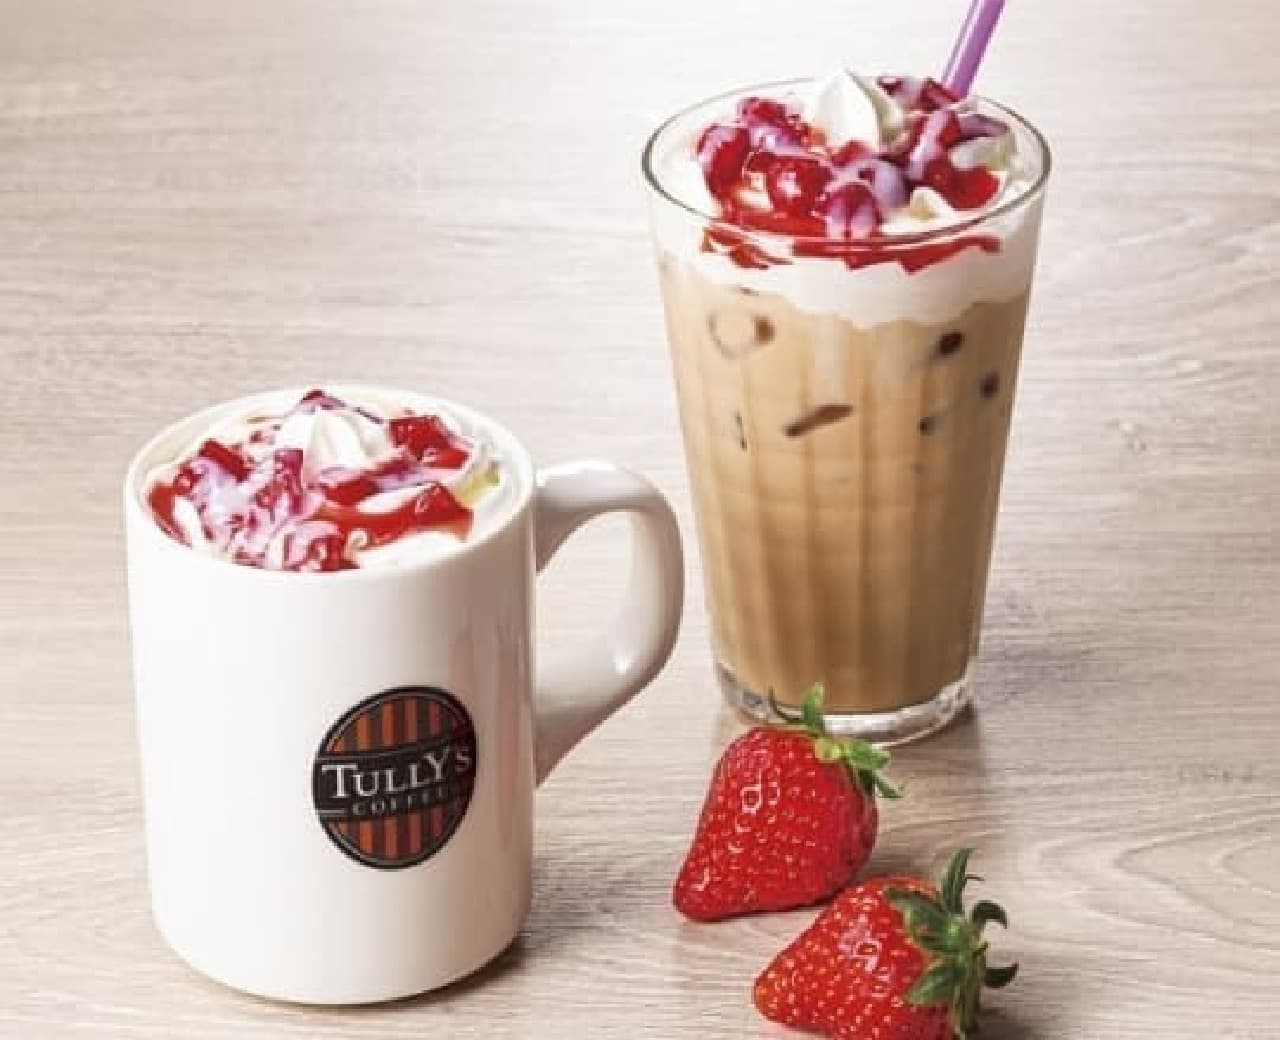 Tully's Coffee "Strawberry Milk Cafe Latte"